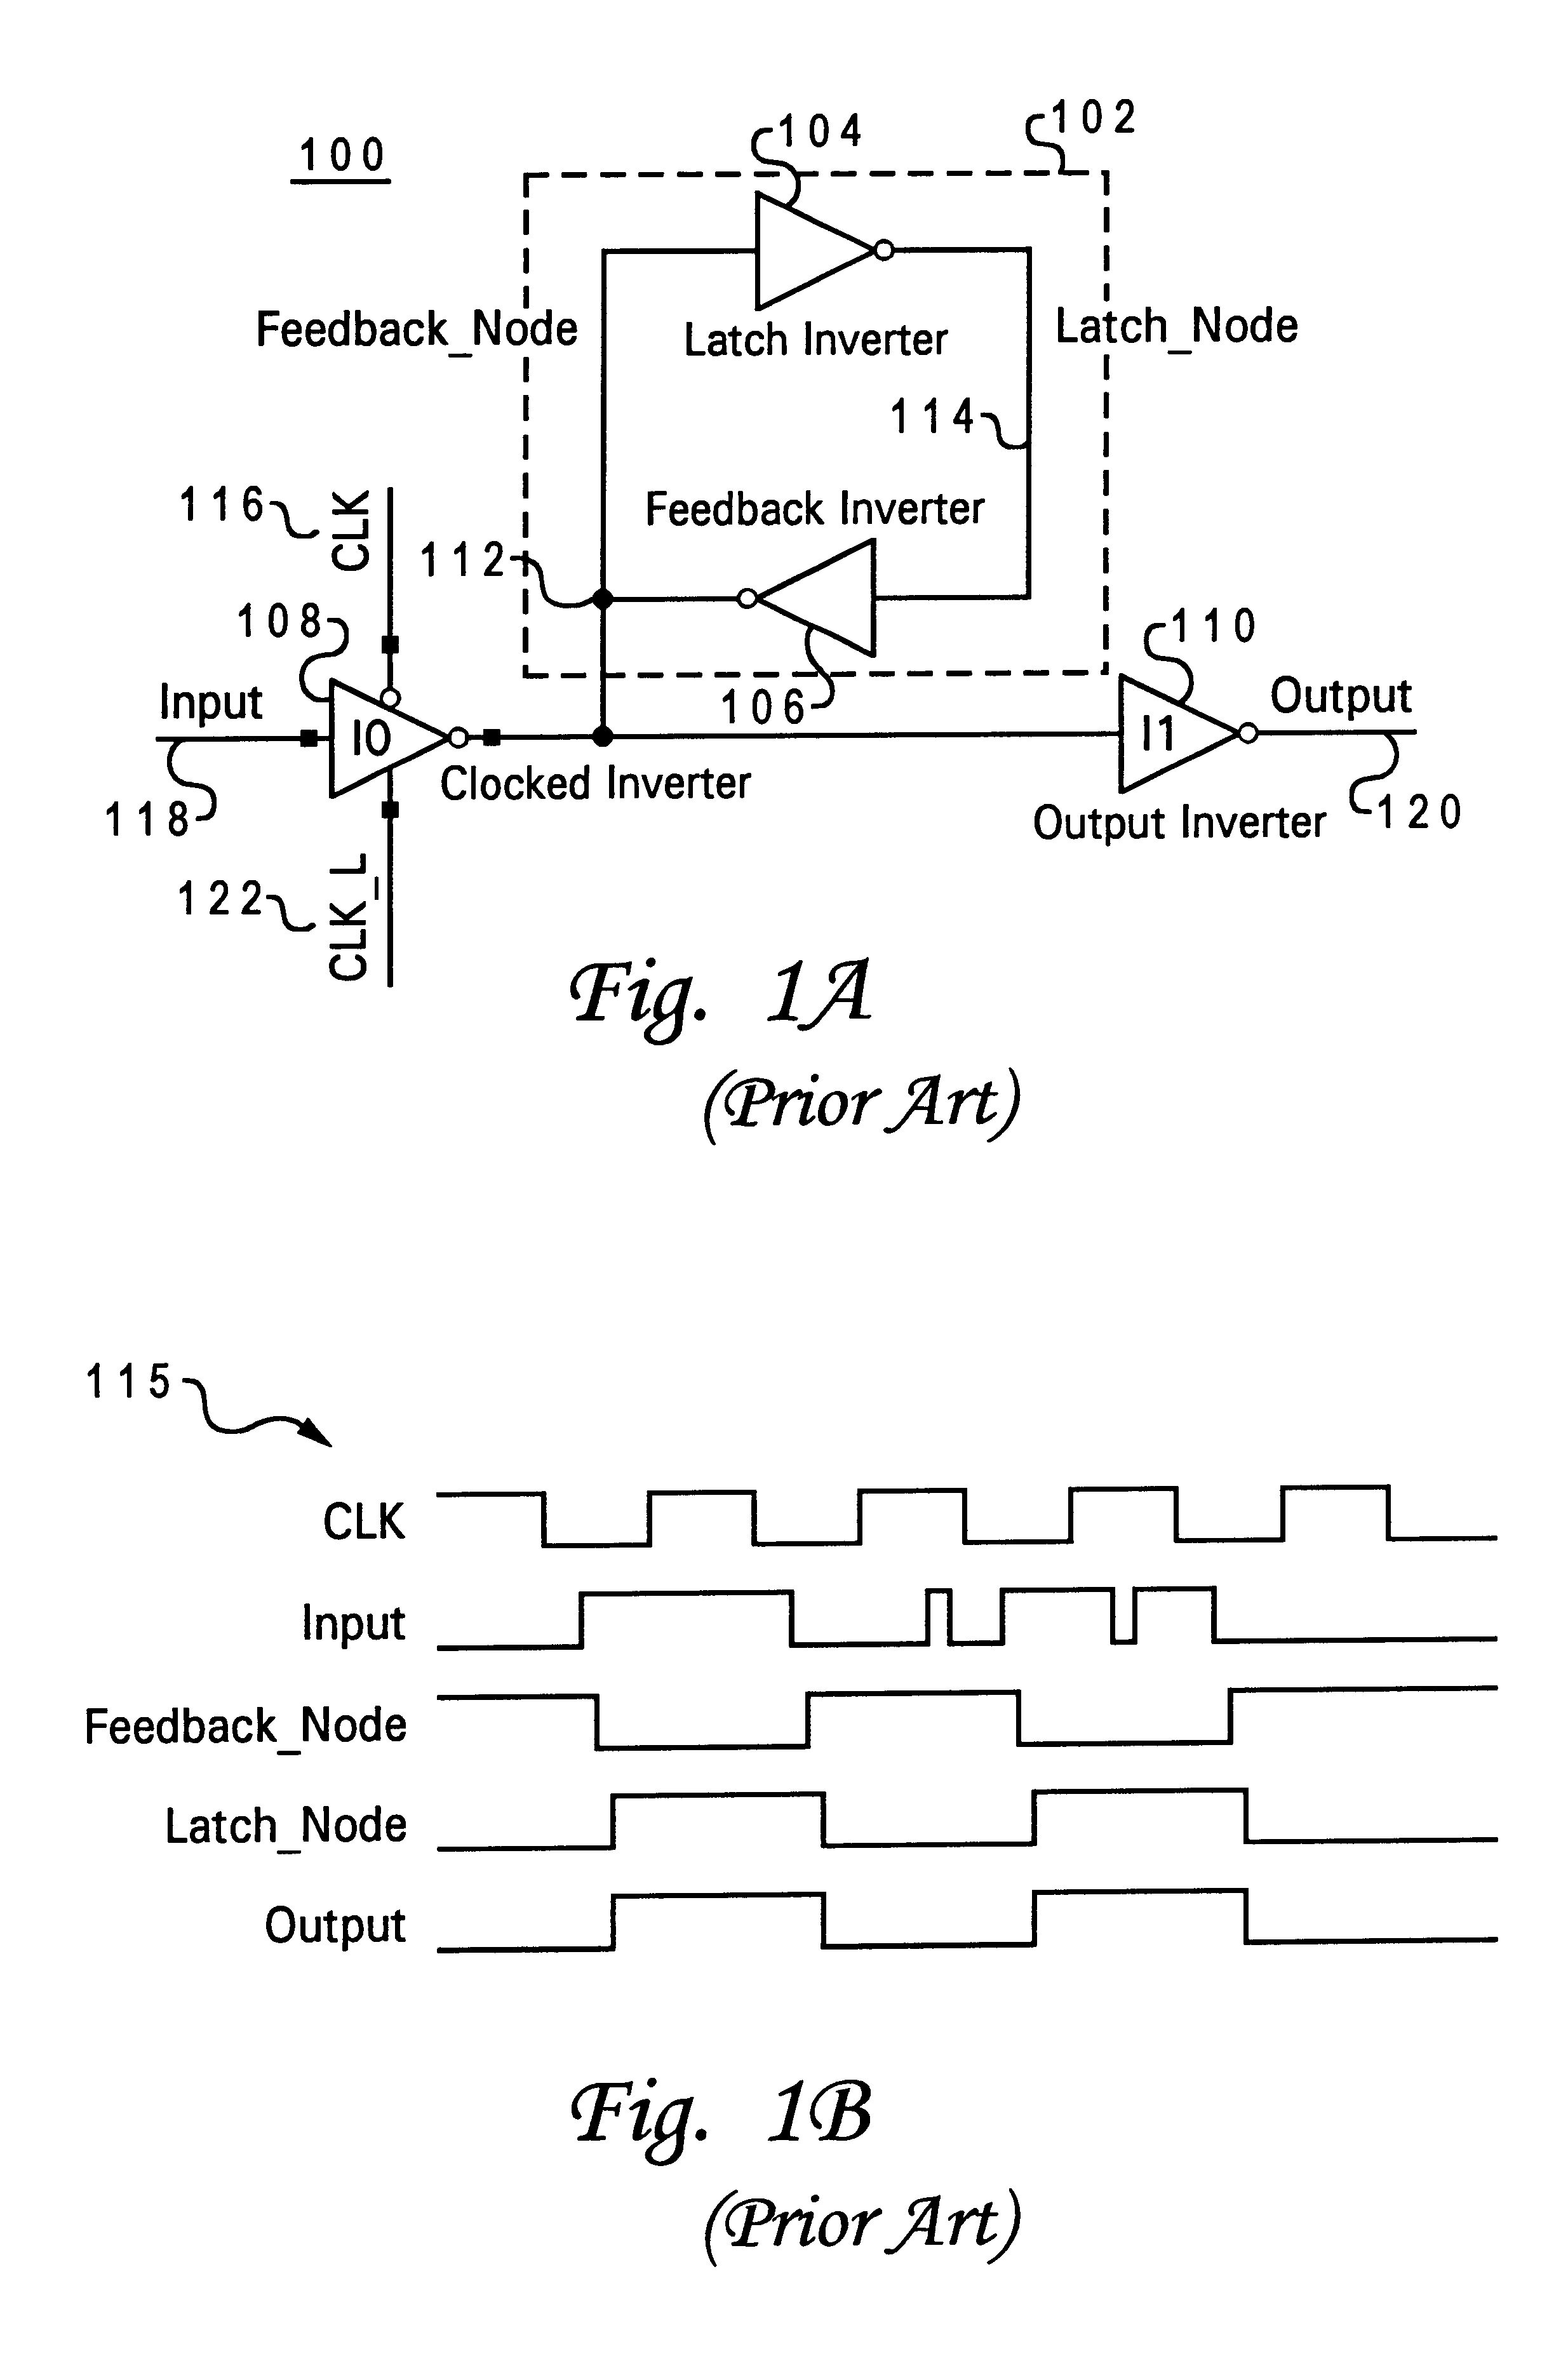 Adjustable feedback for CMOS latches